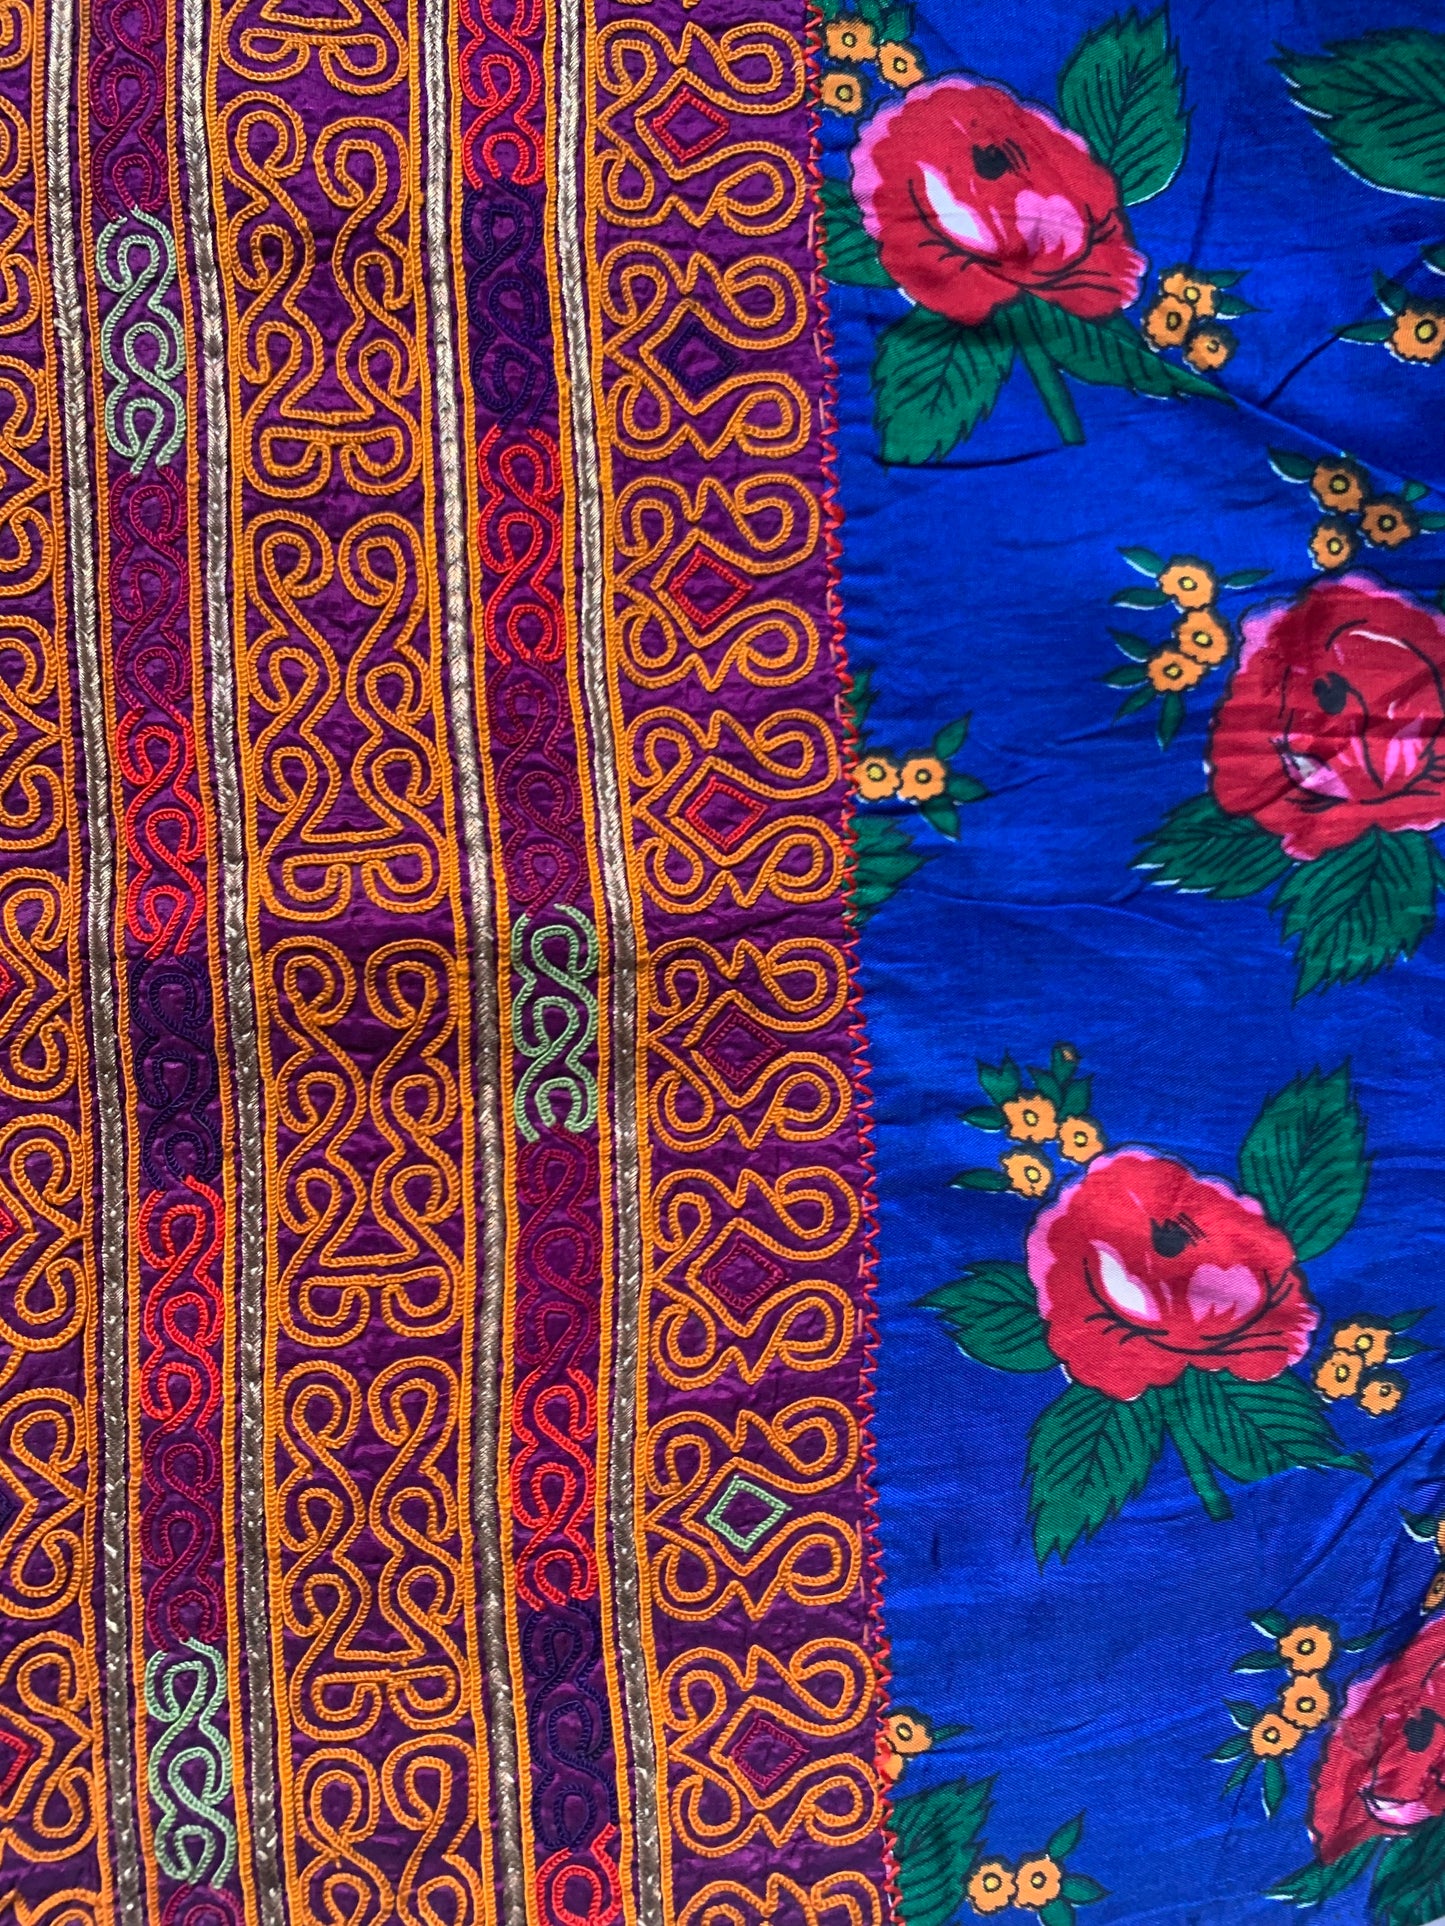 TEXTILE WITH ORANGE EMBROIDERY